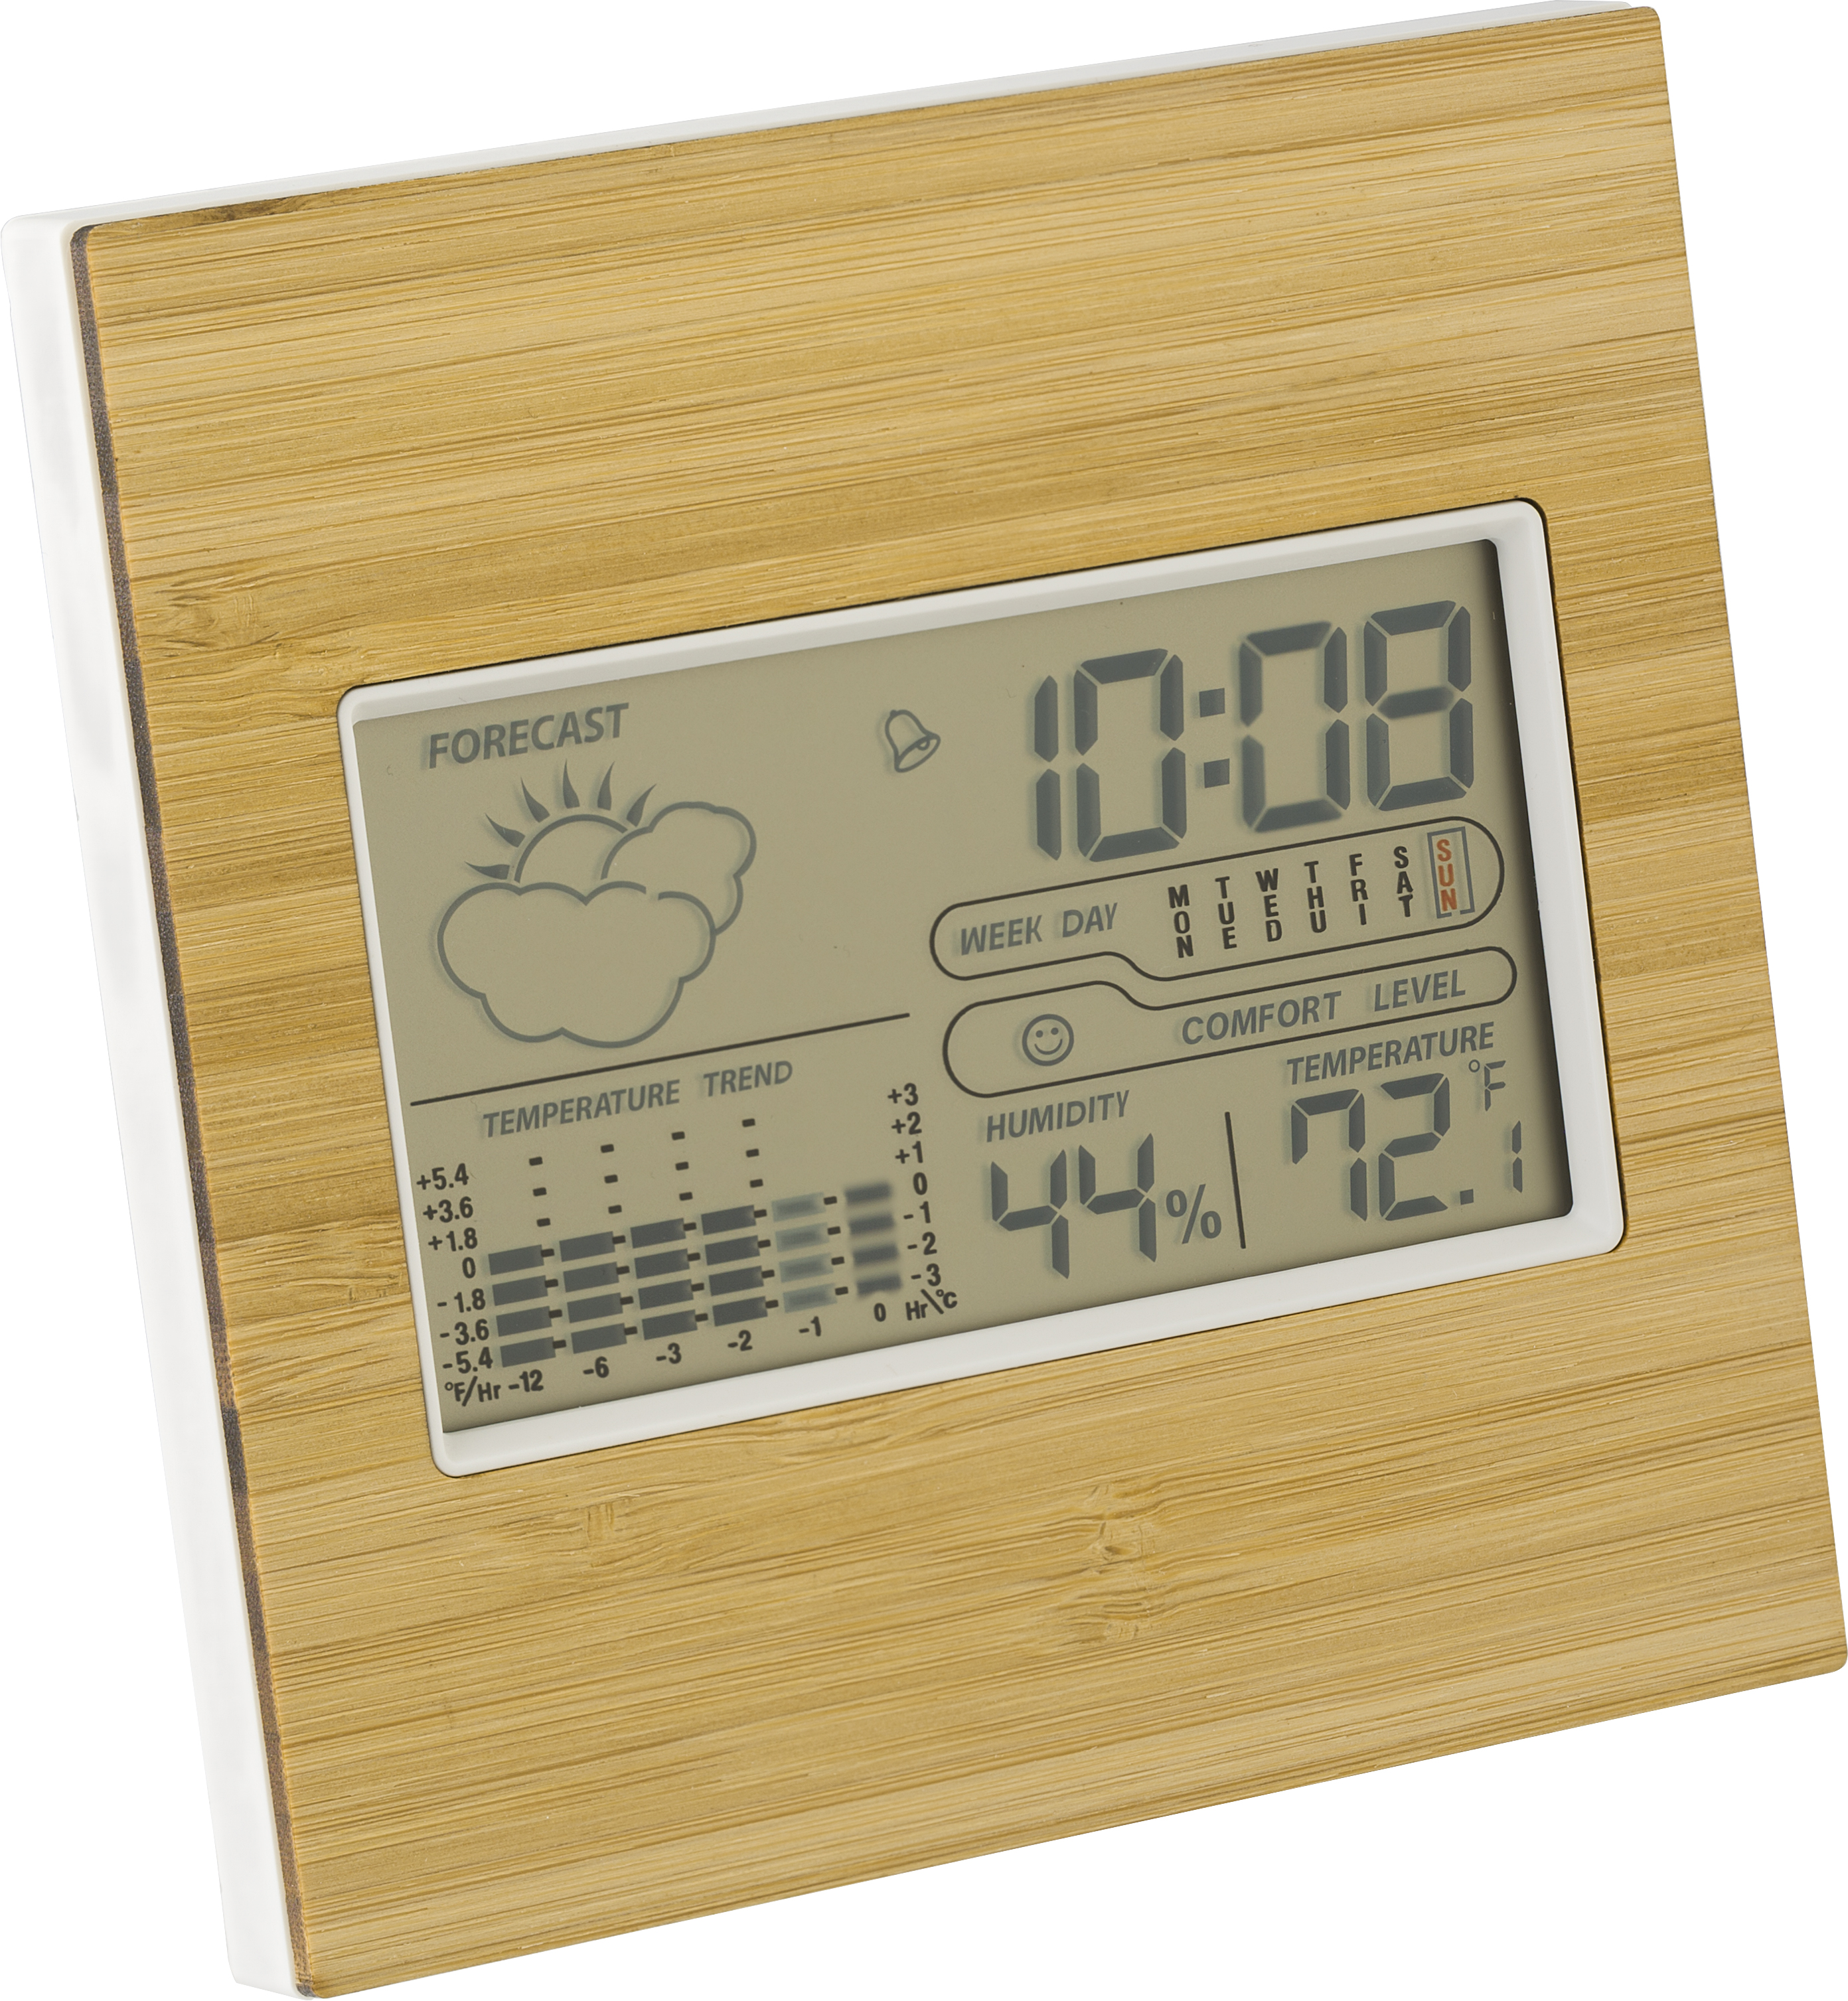 000000710322 823999999 3d135 lft pro01 2021 fal - Bamboo weather station